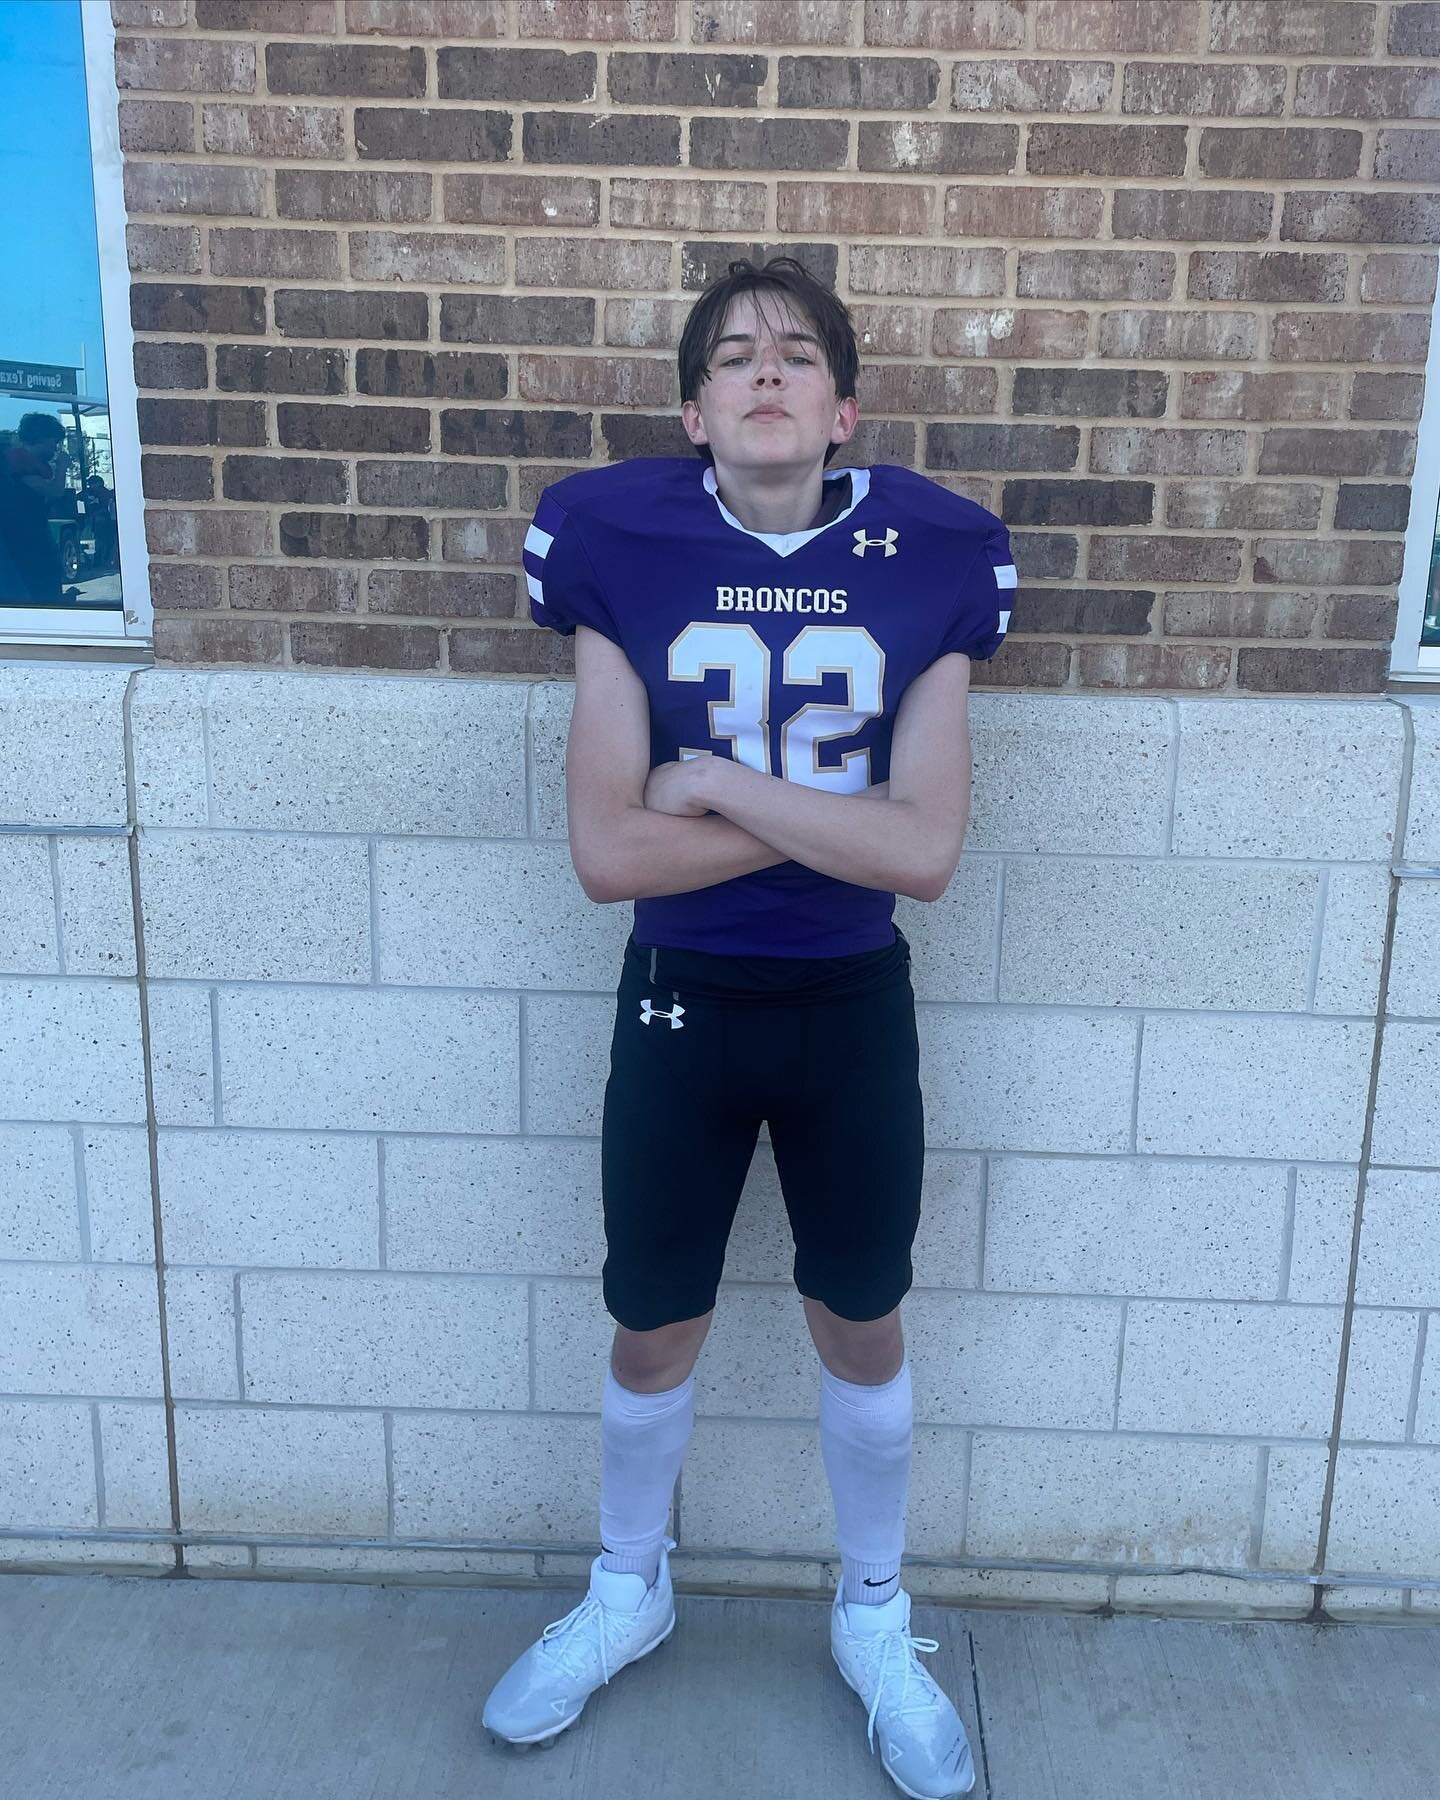 Loved watching my football 🏈 player tonight in his spring game. Excited to cheer on the Denton bronco football team next fall 

@holden_mallouf #newus #dentonbroncos #dhsfootball #dentonhighschool #dentonisd #springfootball